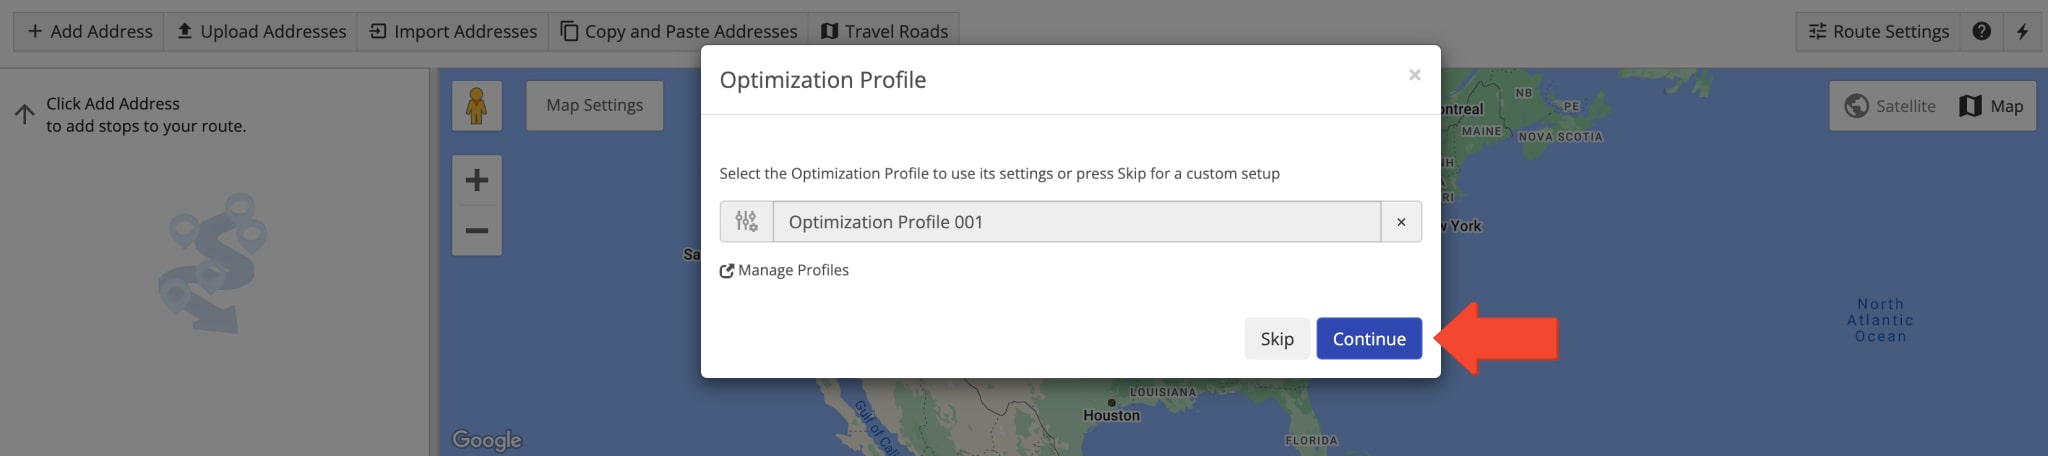 Select the preferred optimization profile for planning and optimizing routes with delivery orders.